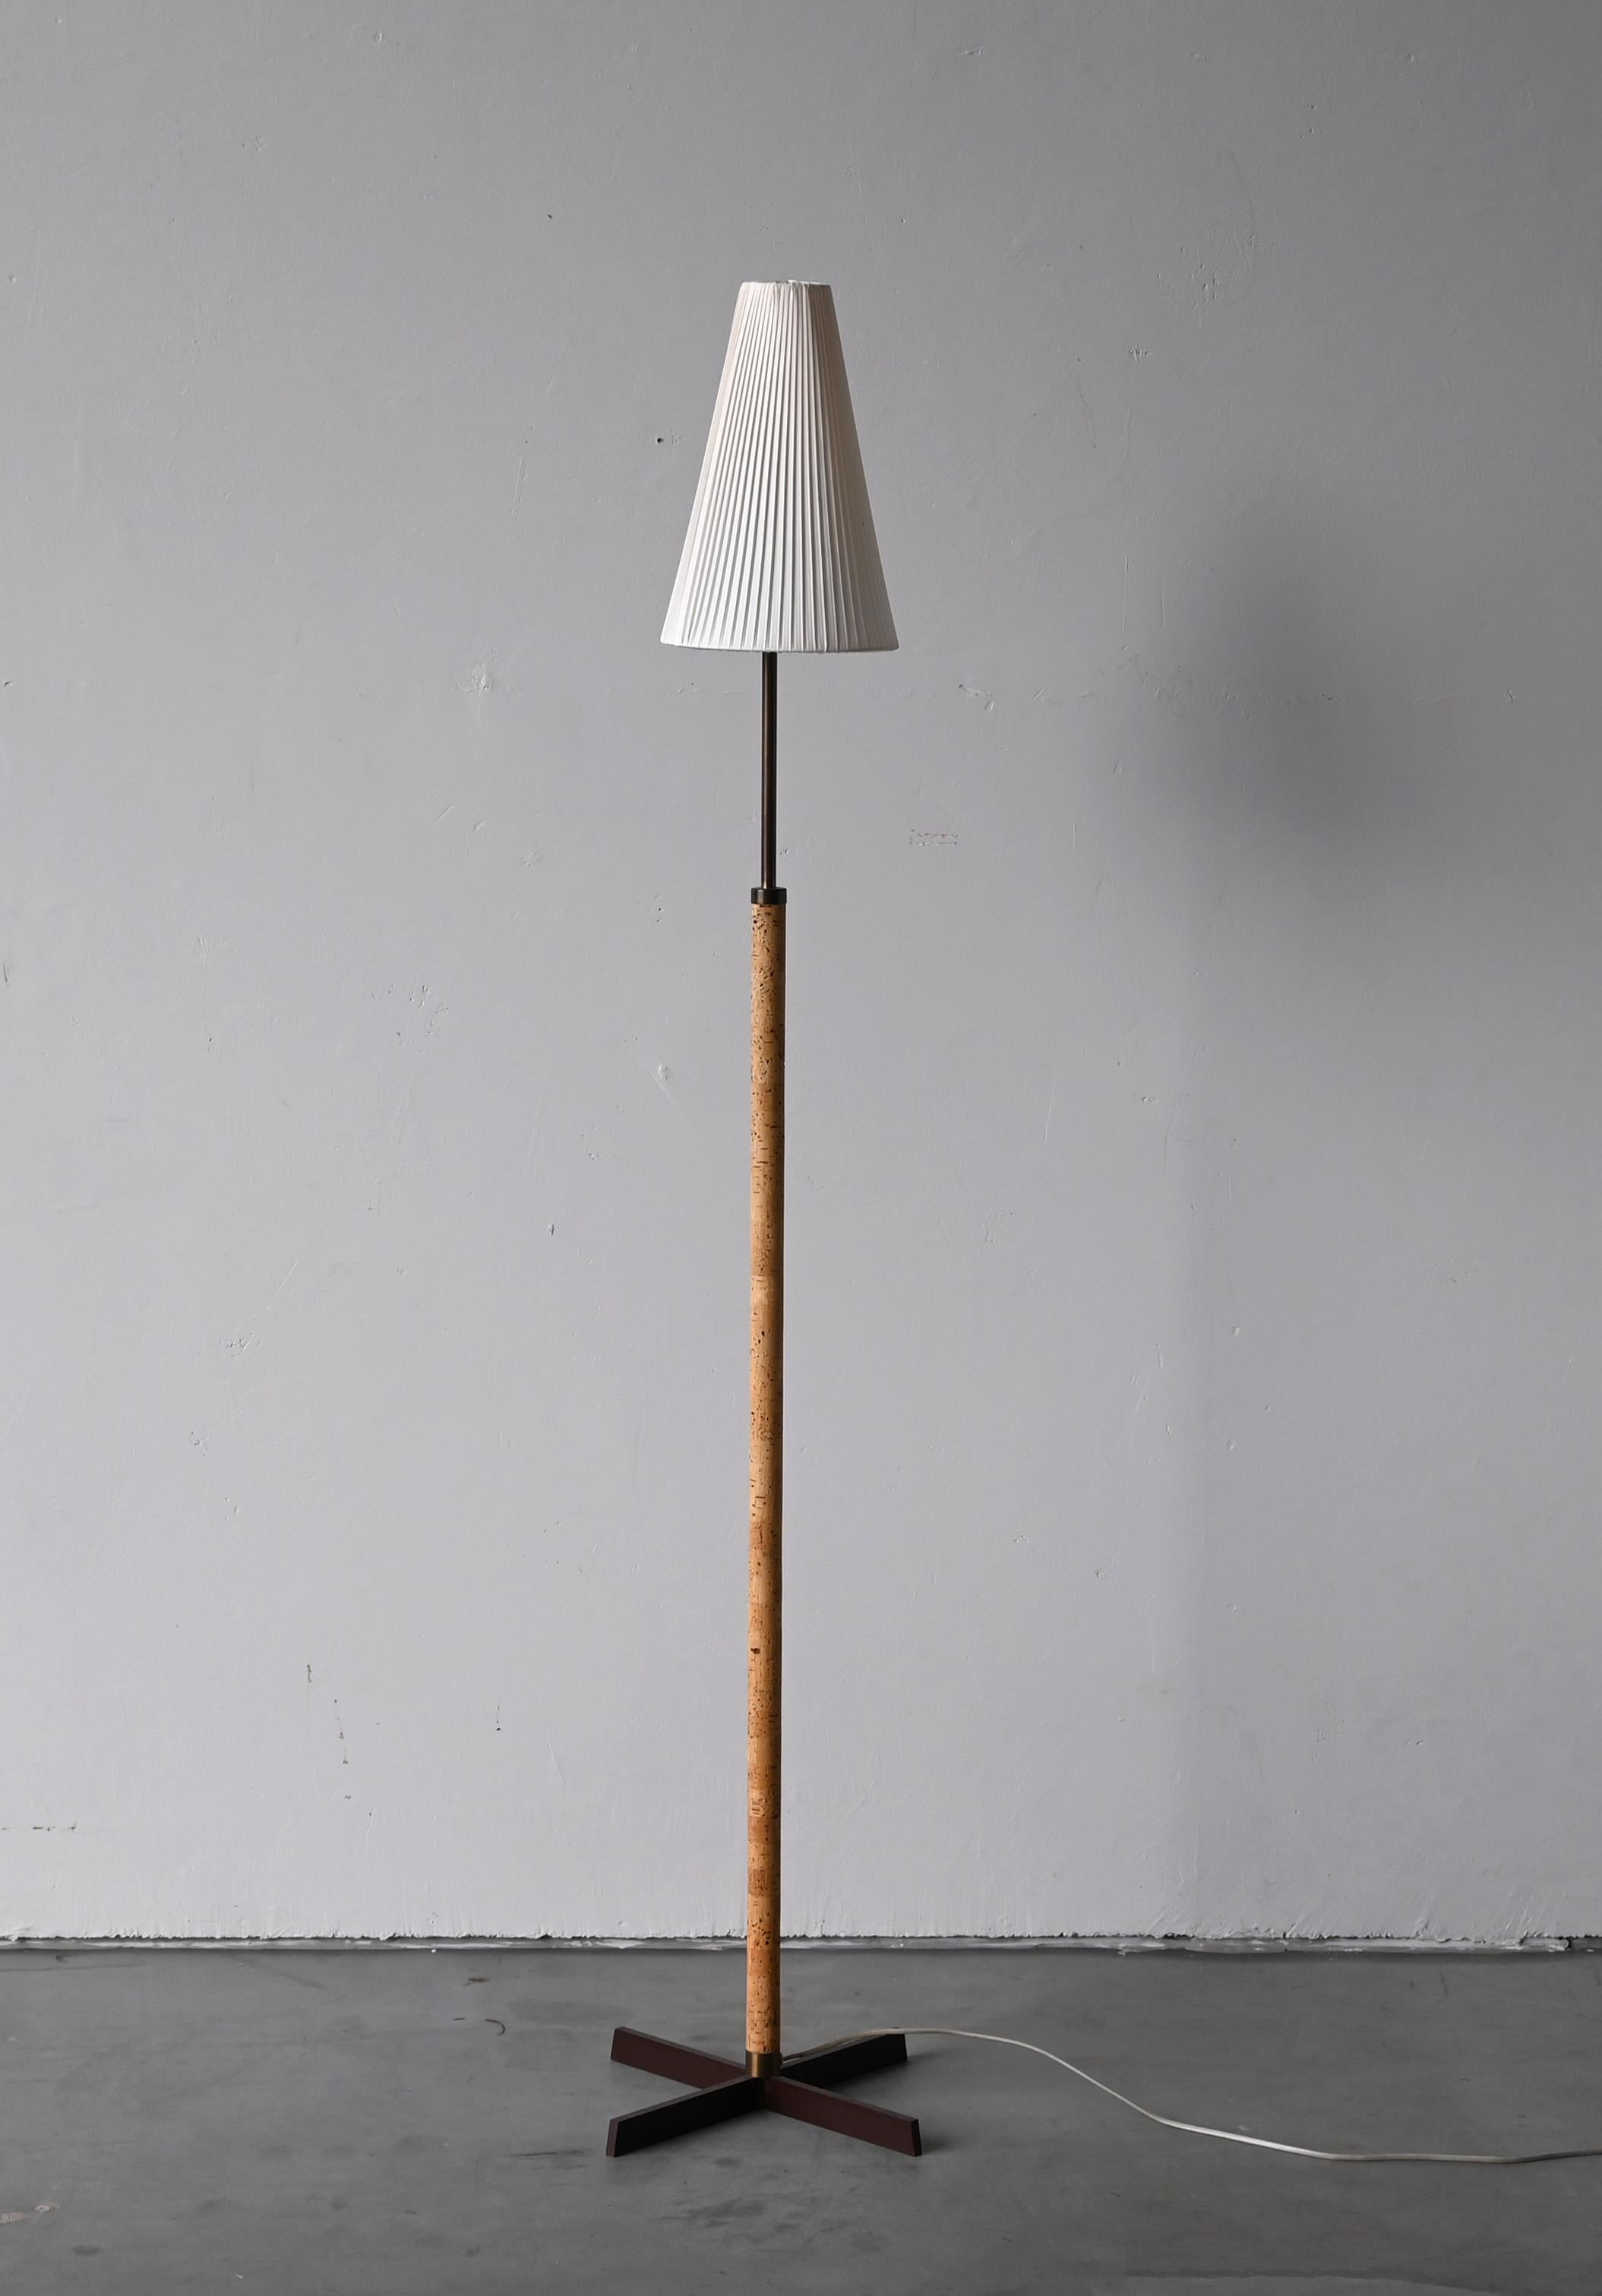 An modernist floor lamp, design attributed to Svend Aage Holm Sørensen, Denmark, 1950s. With lacquered metal base, stem wrapped in cork. Brand new high-end lampshade.

Other designers of the period include Paavo Tynell, Serge Mouille, Josef Frank,